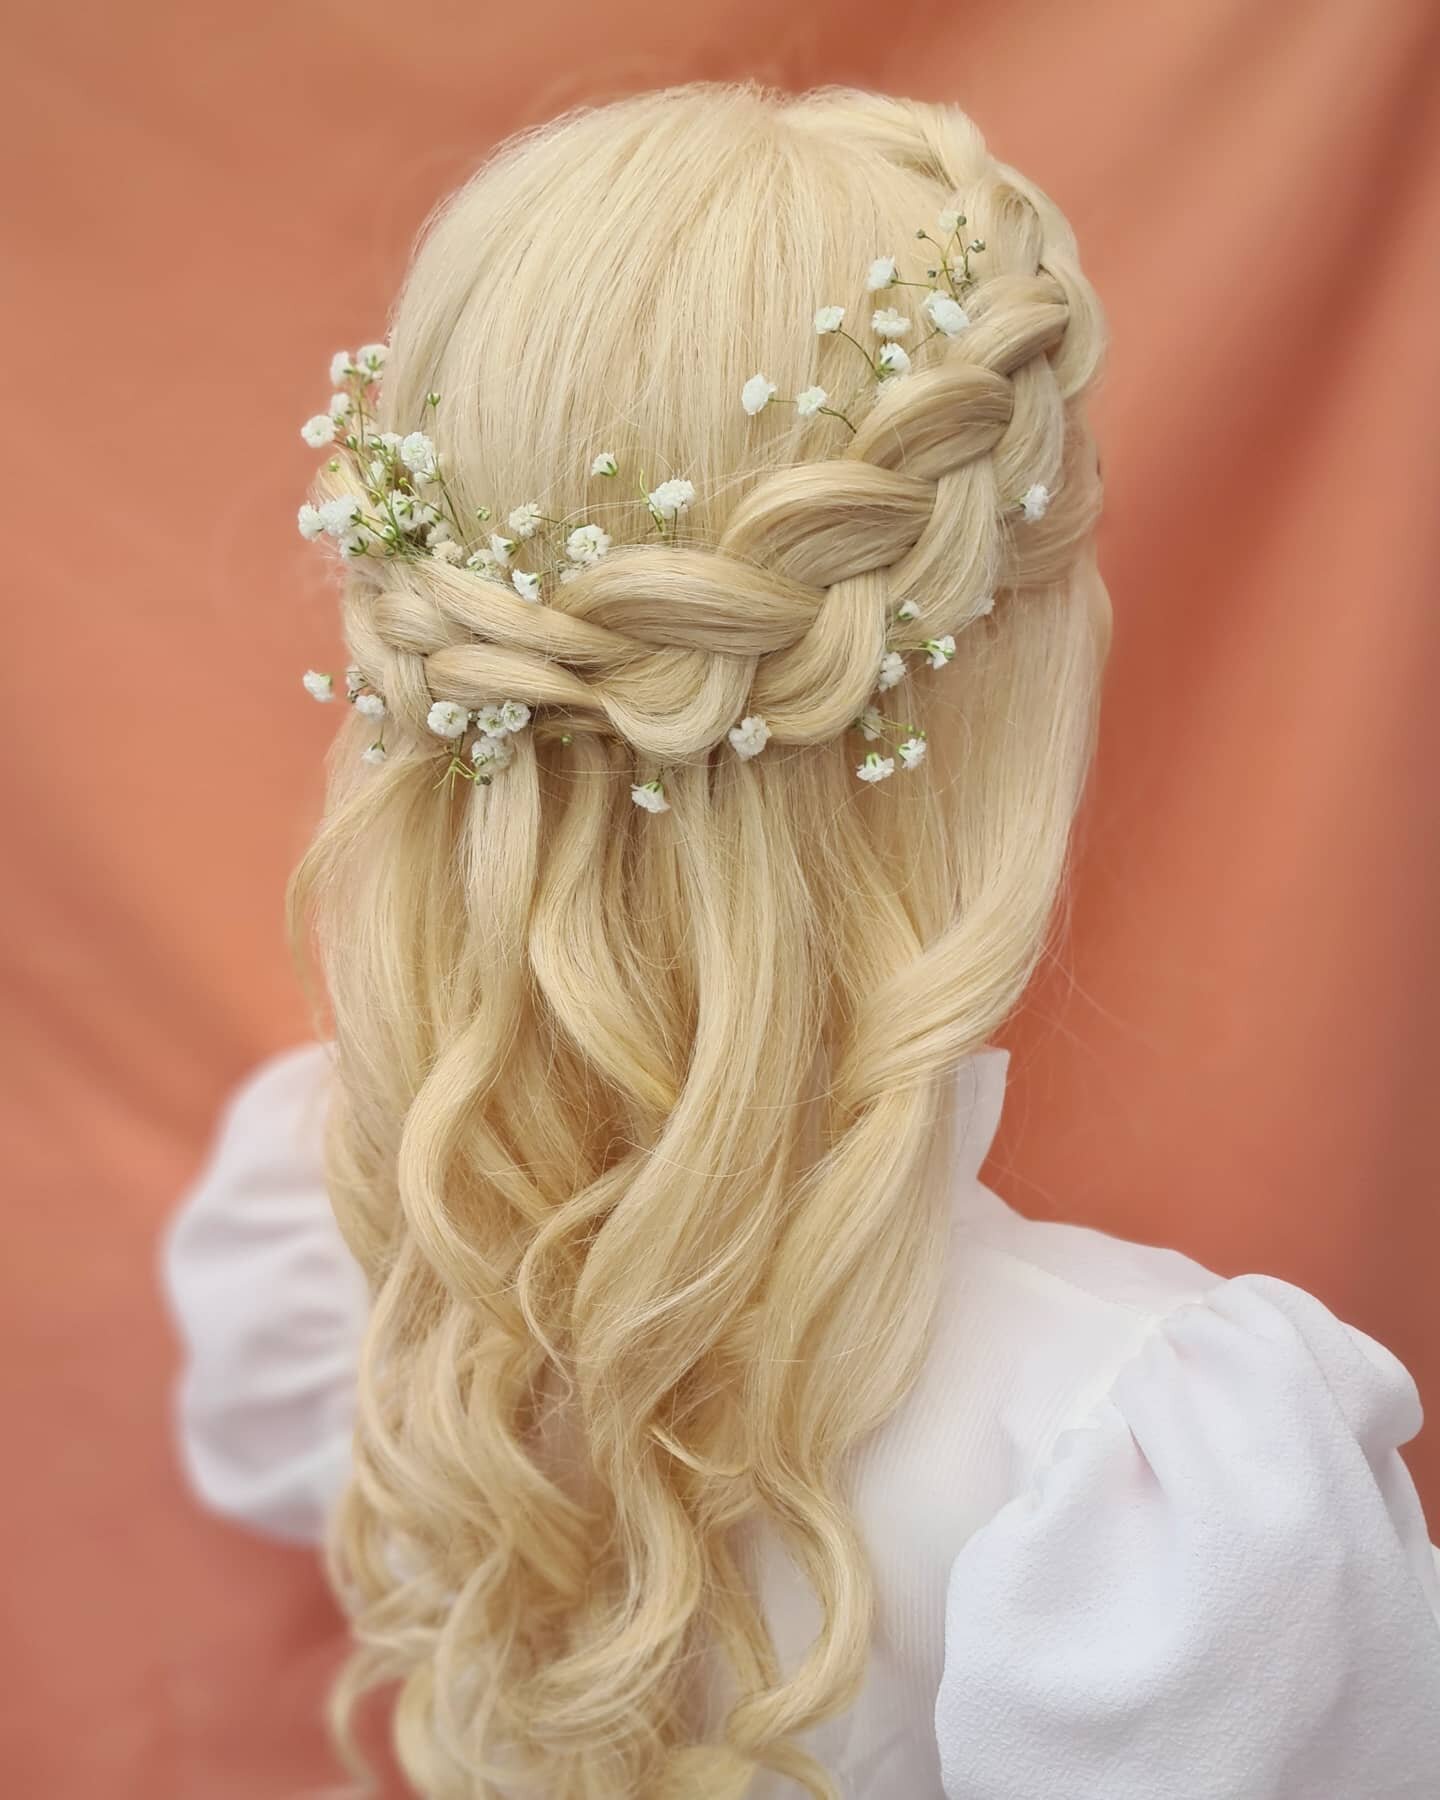 A special request for @misstashmurphy 💕 a braided half updo with Gyp 🌸 this is such a pretty option for hair &amp; this floral can be sprinkled in bridal hair, bridesmaids AND also match your bouquets too - I love it 💖 xx